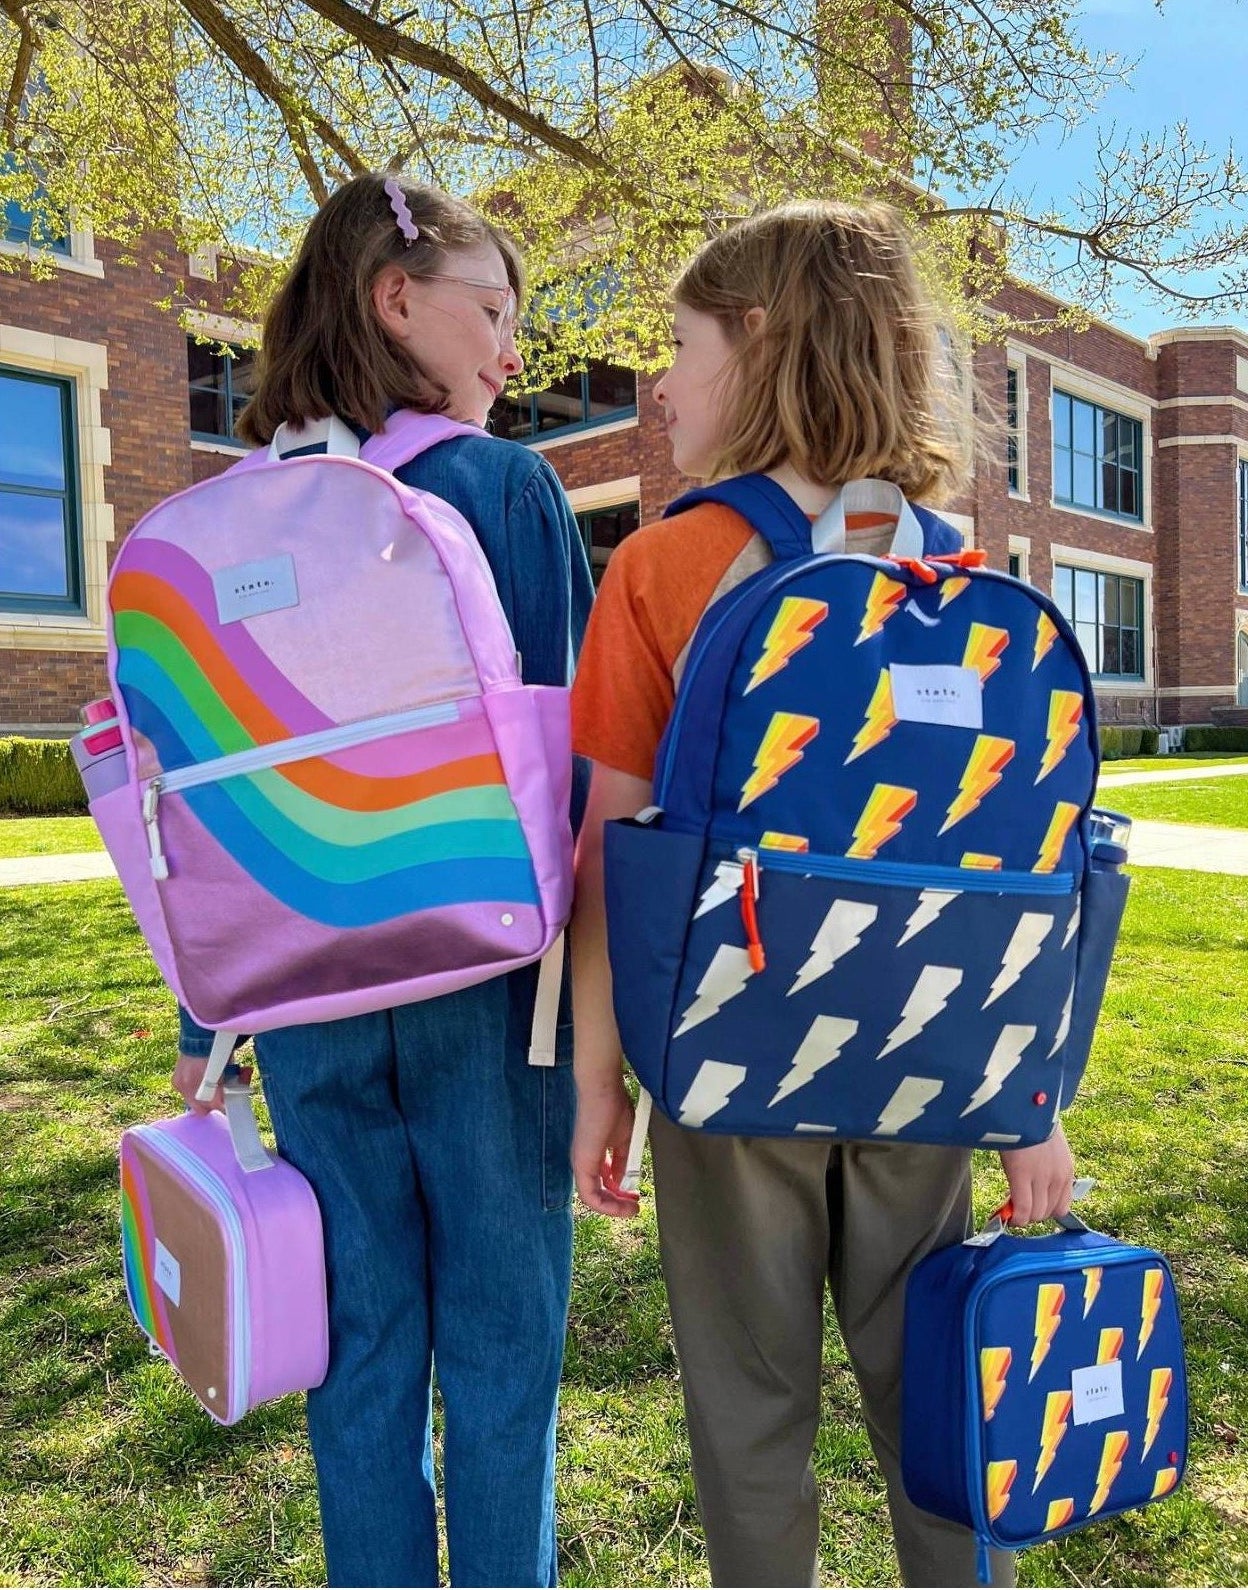 two kids wearing the backpacks at school